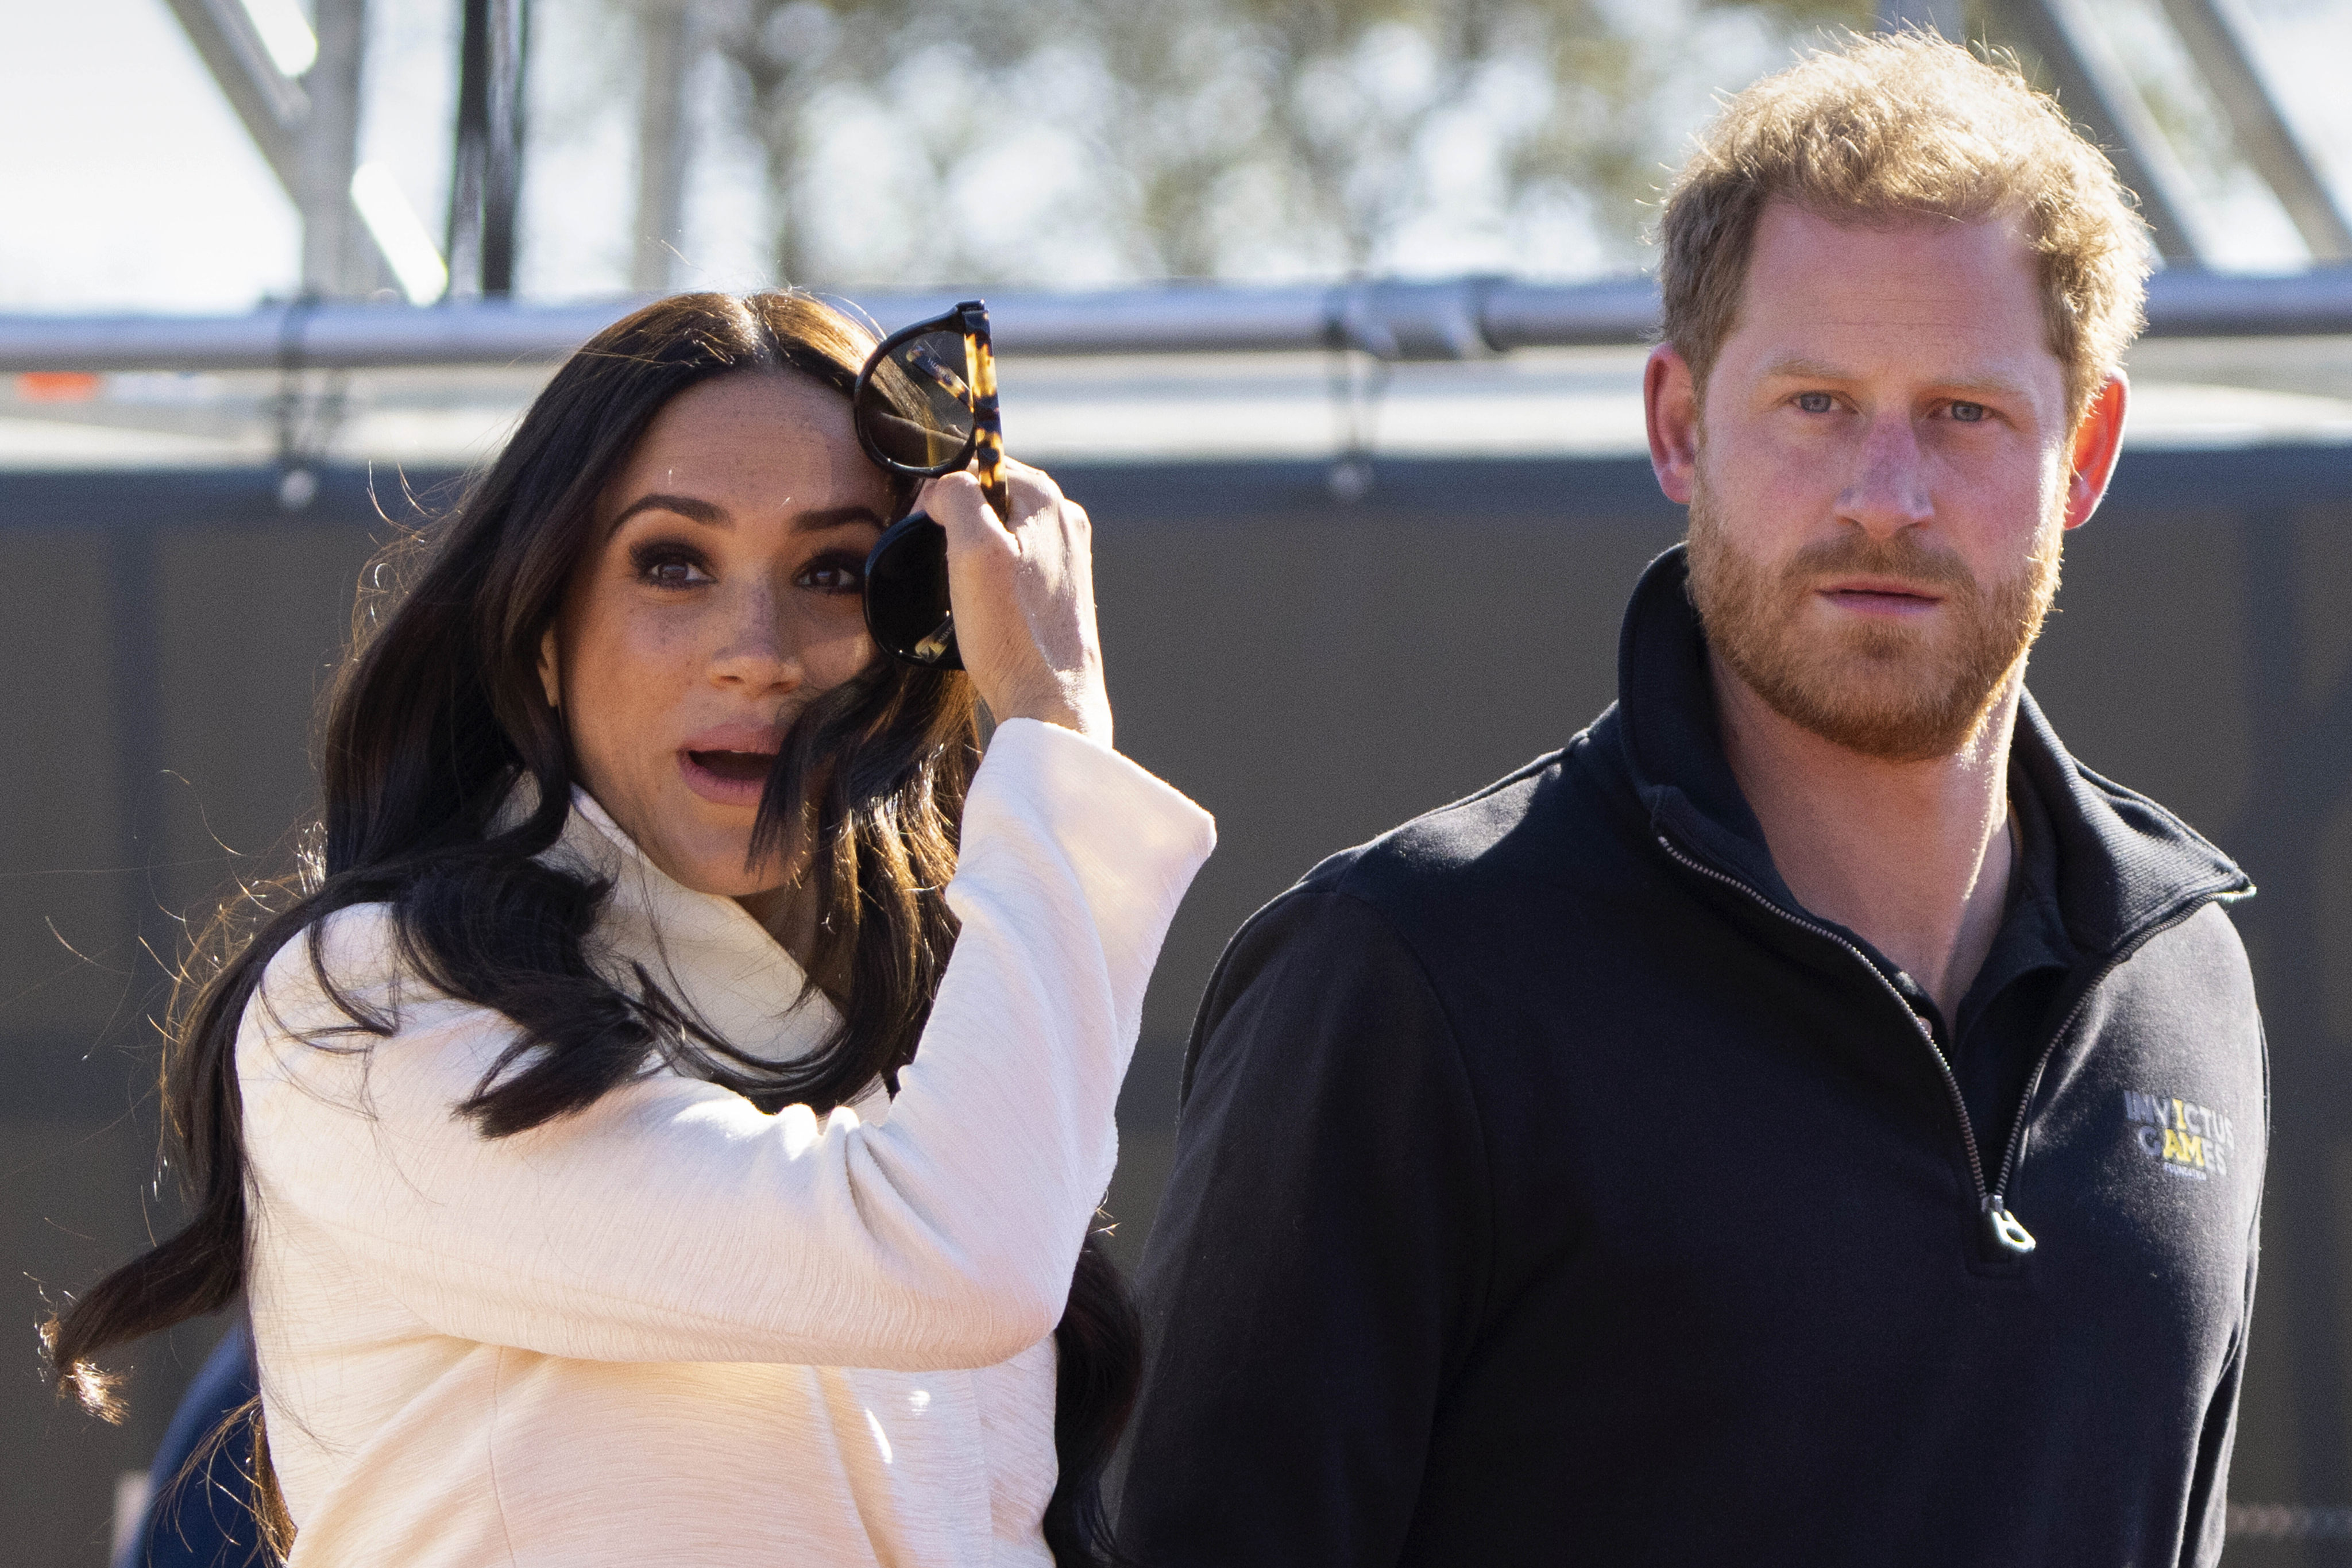 Prince Harry and Meghan Markle were followed for more than two hours by a half-dozen vehicles after leaving a charity event in New York on Tuesday, according to their spokesperson. Photo: AP